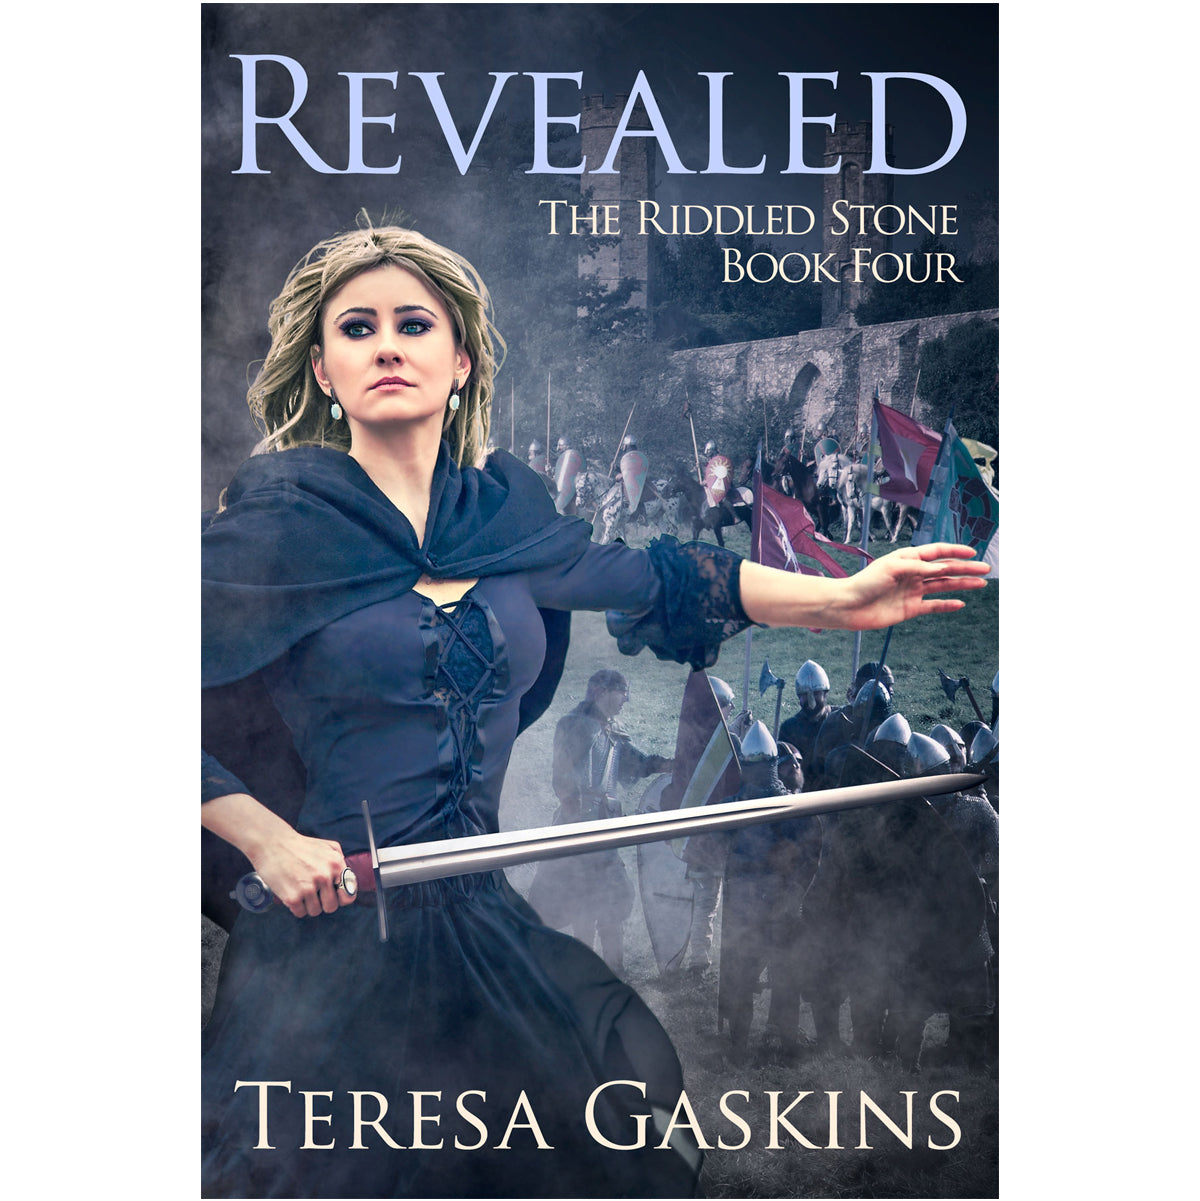 Revealed Riddled Stone book four by Teresa Gaskins